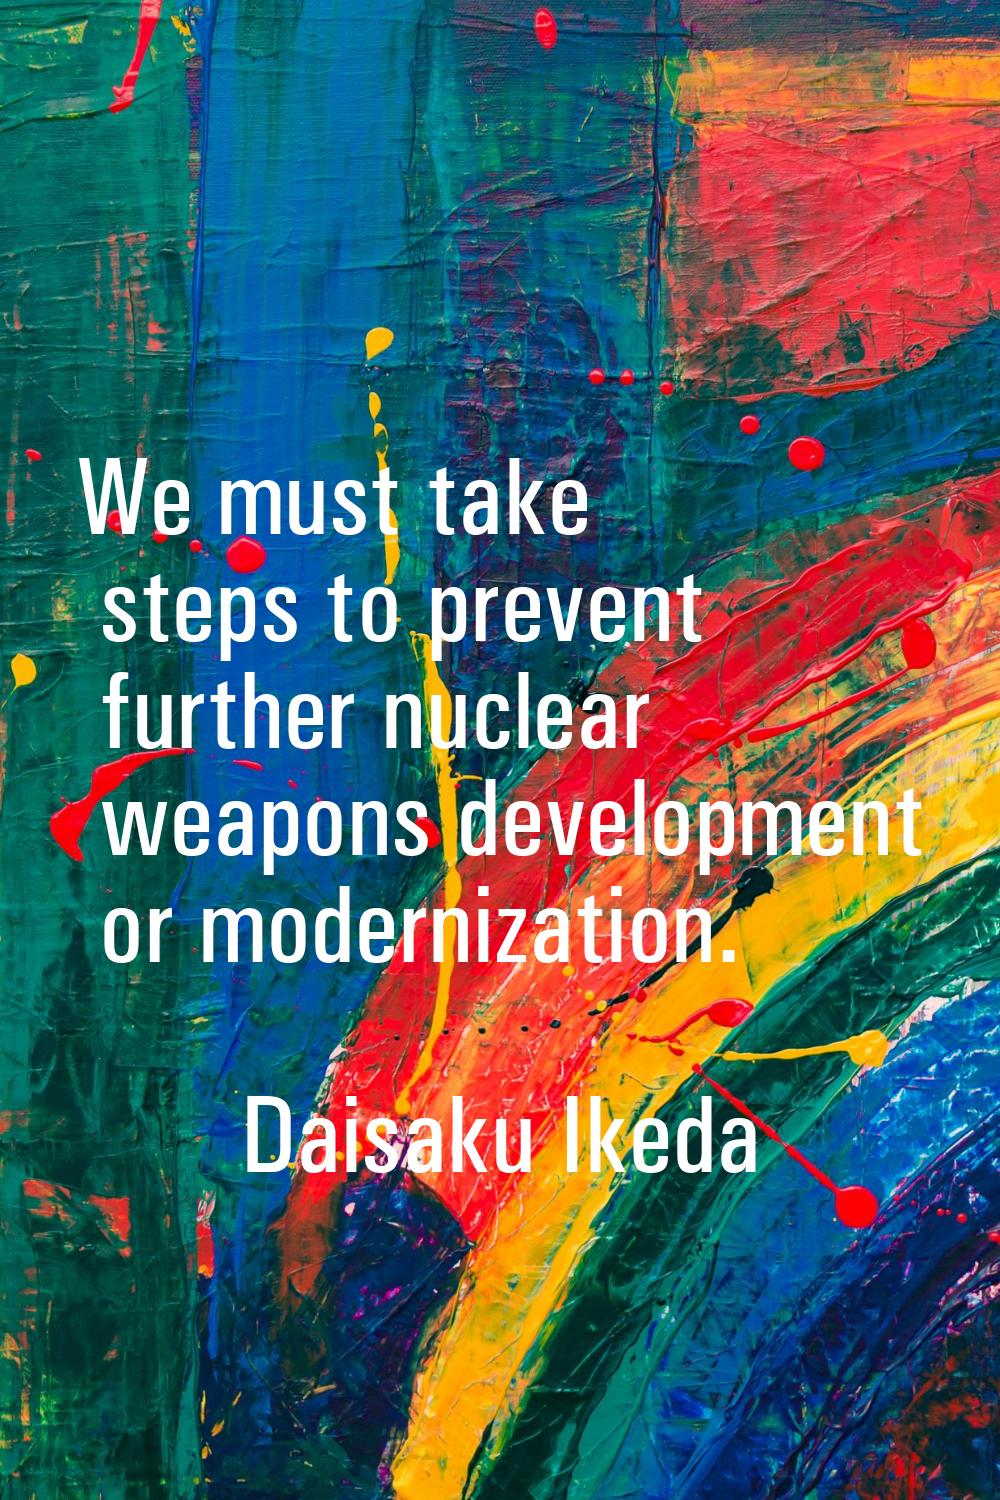 We must take steps to prevent further nuclear weapons development or modernization.